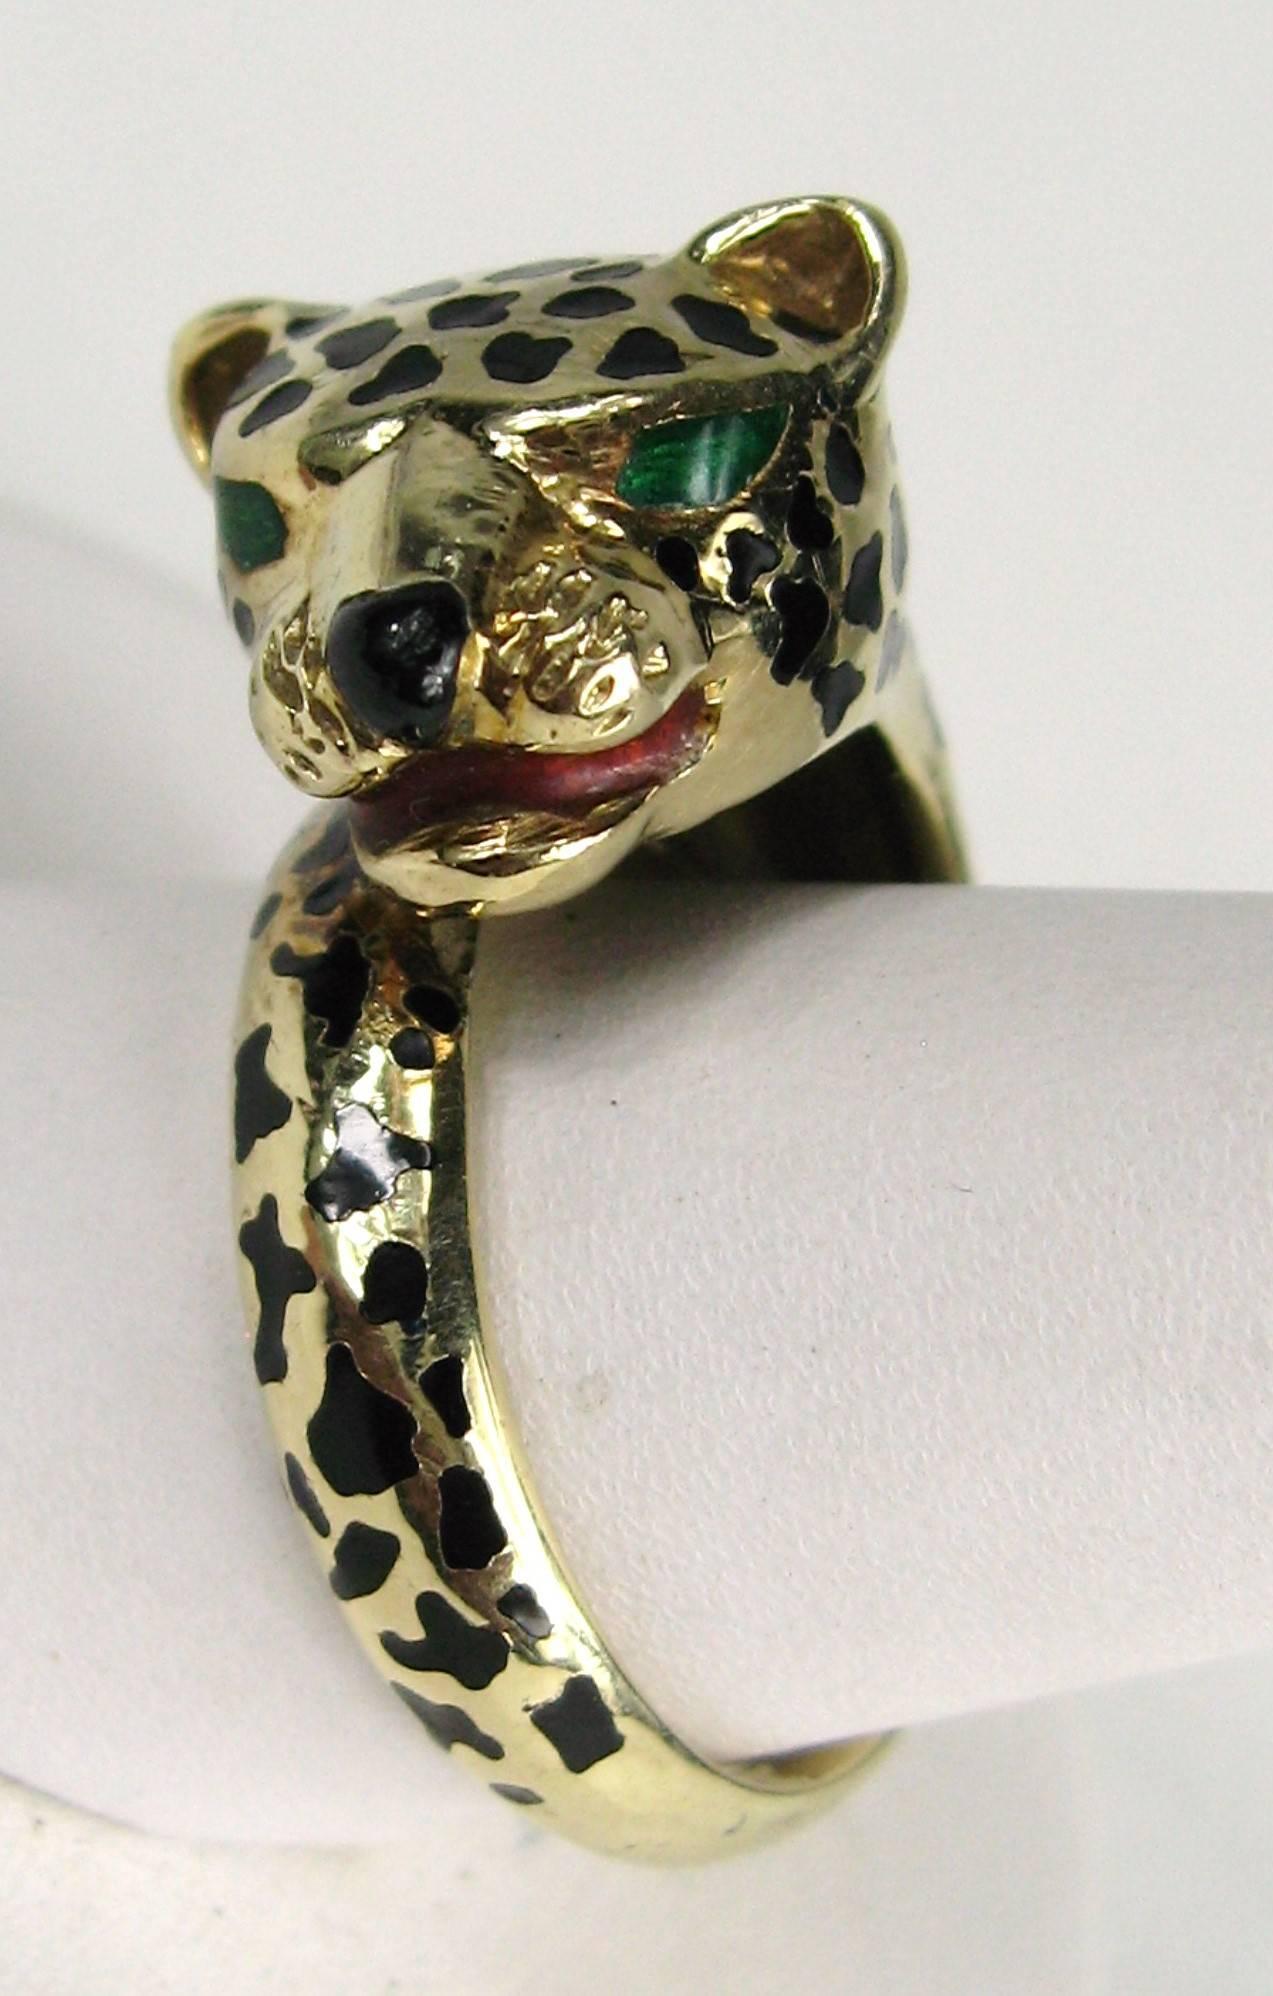 14K gold leopard head that wraps around your finger. Enamel spots and eyes. Hallmarked HM 14K inside the shank. The ring is a size 6.75 and can be sized up or down by us or your jeweler. This is out of a massive collection of Contemporary designer